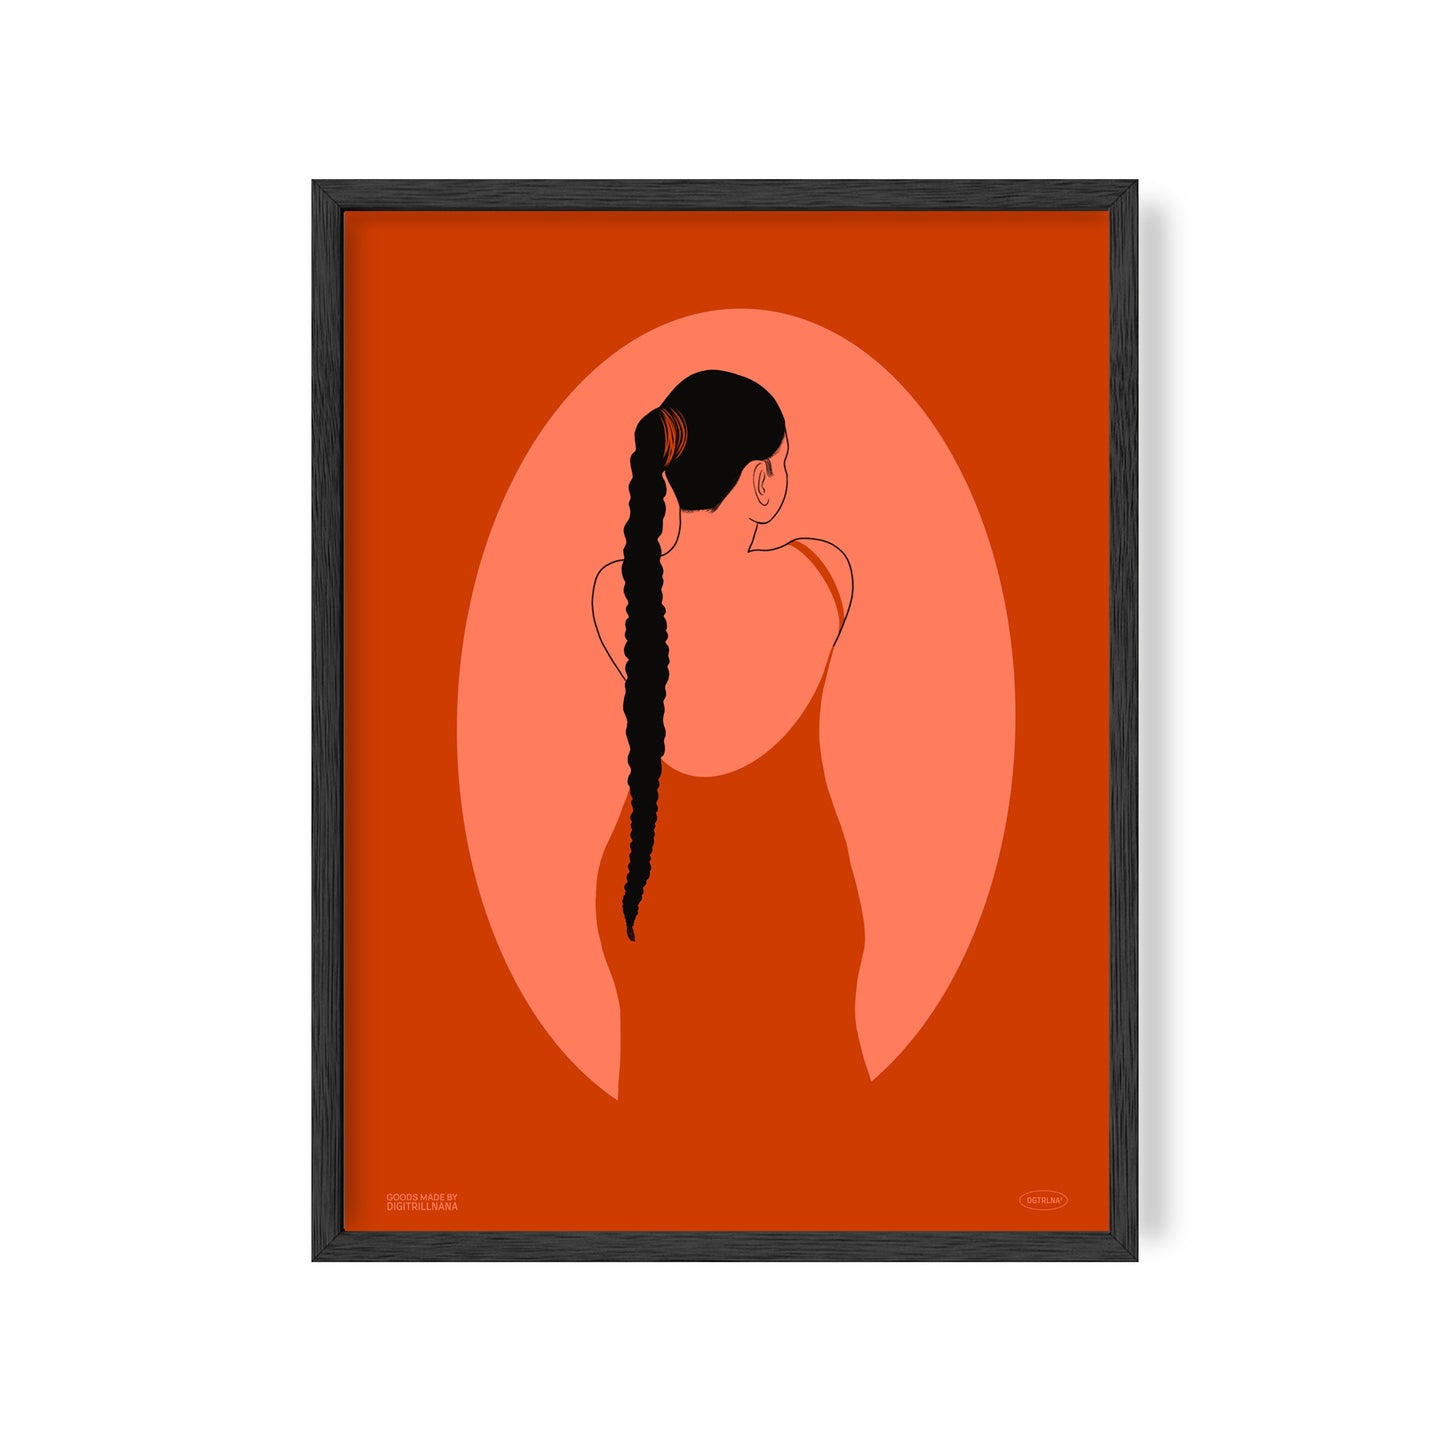 A series of four vibrant monochromatic illustrations of black women figures in the hues orange, blue, and teal. The illustration features a silhouette oval with a women’s figure inside. Light and dark colors create an optical illusion with positive and negative space.  Silhouette 1: Illustration of a orange monochrome silhouette back view of a figure in a low back silk dress with her hair in a long ponytail. 